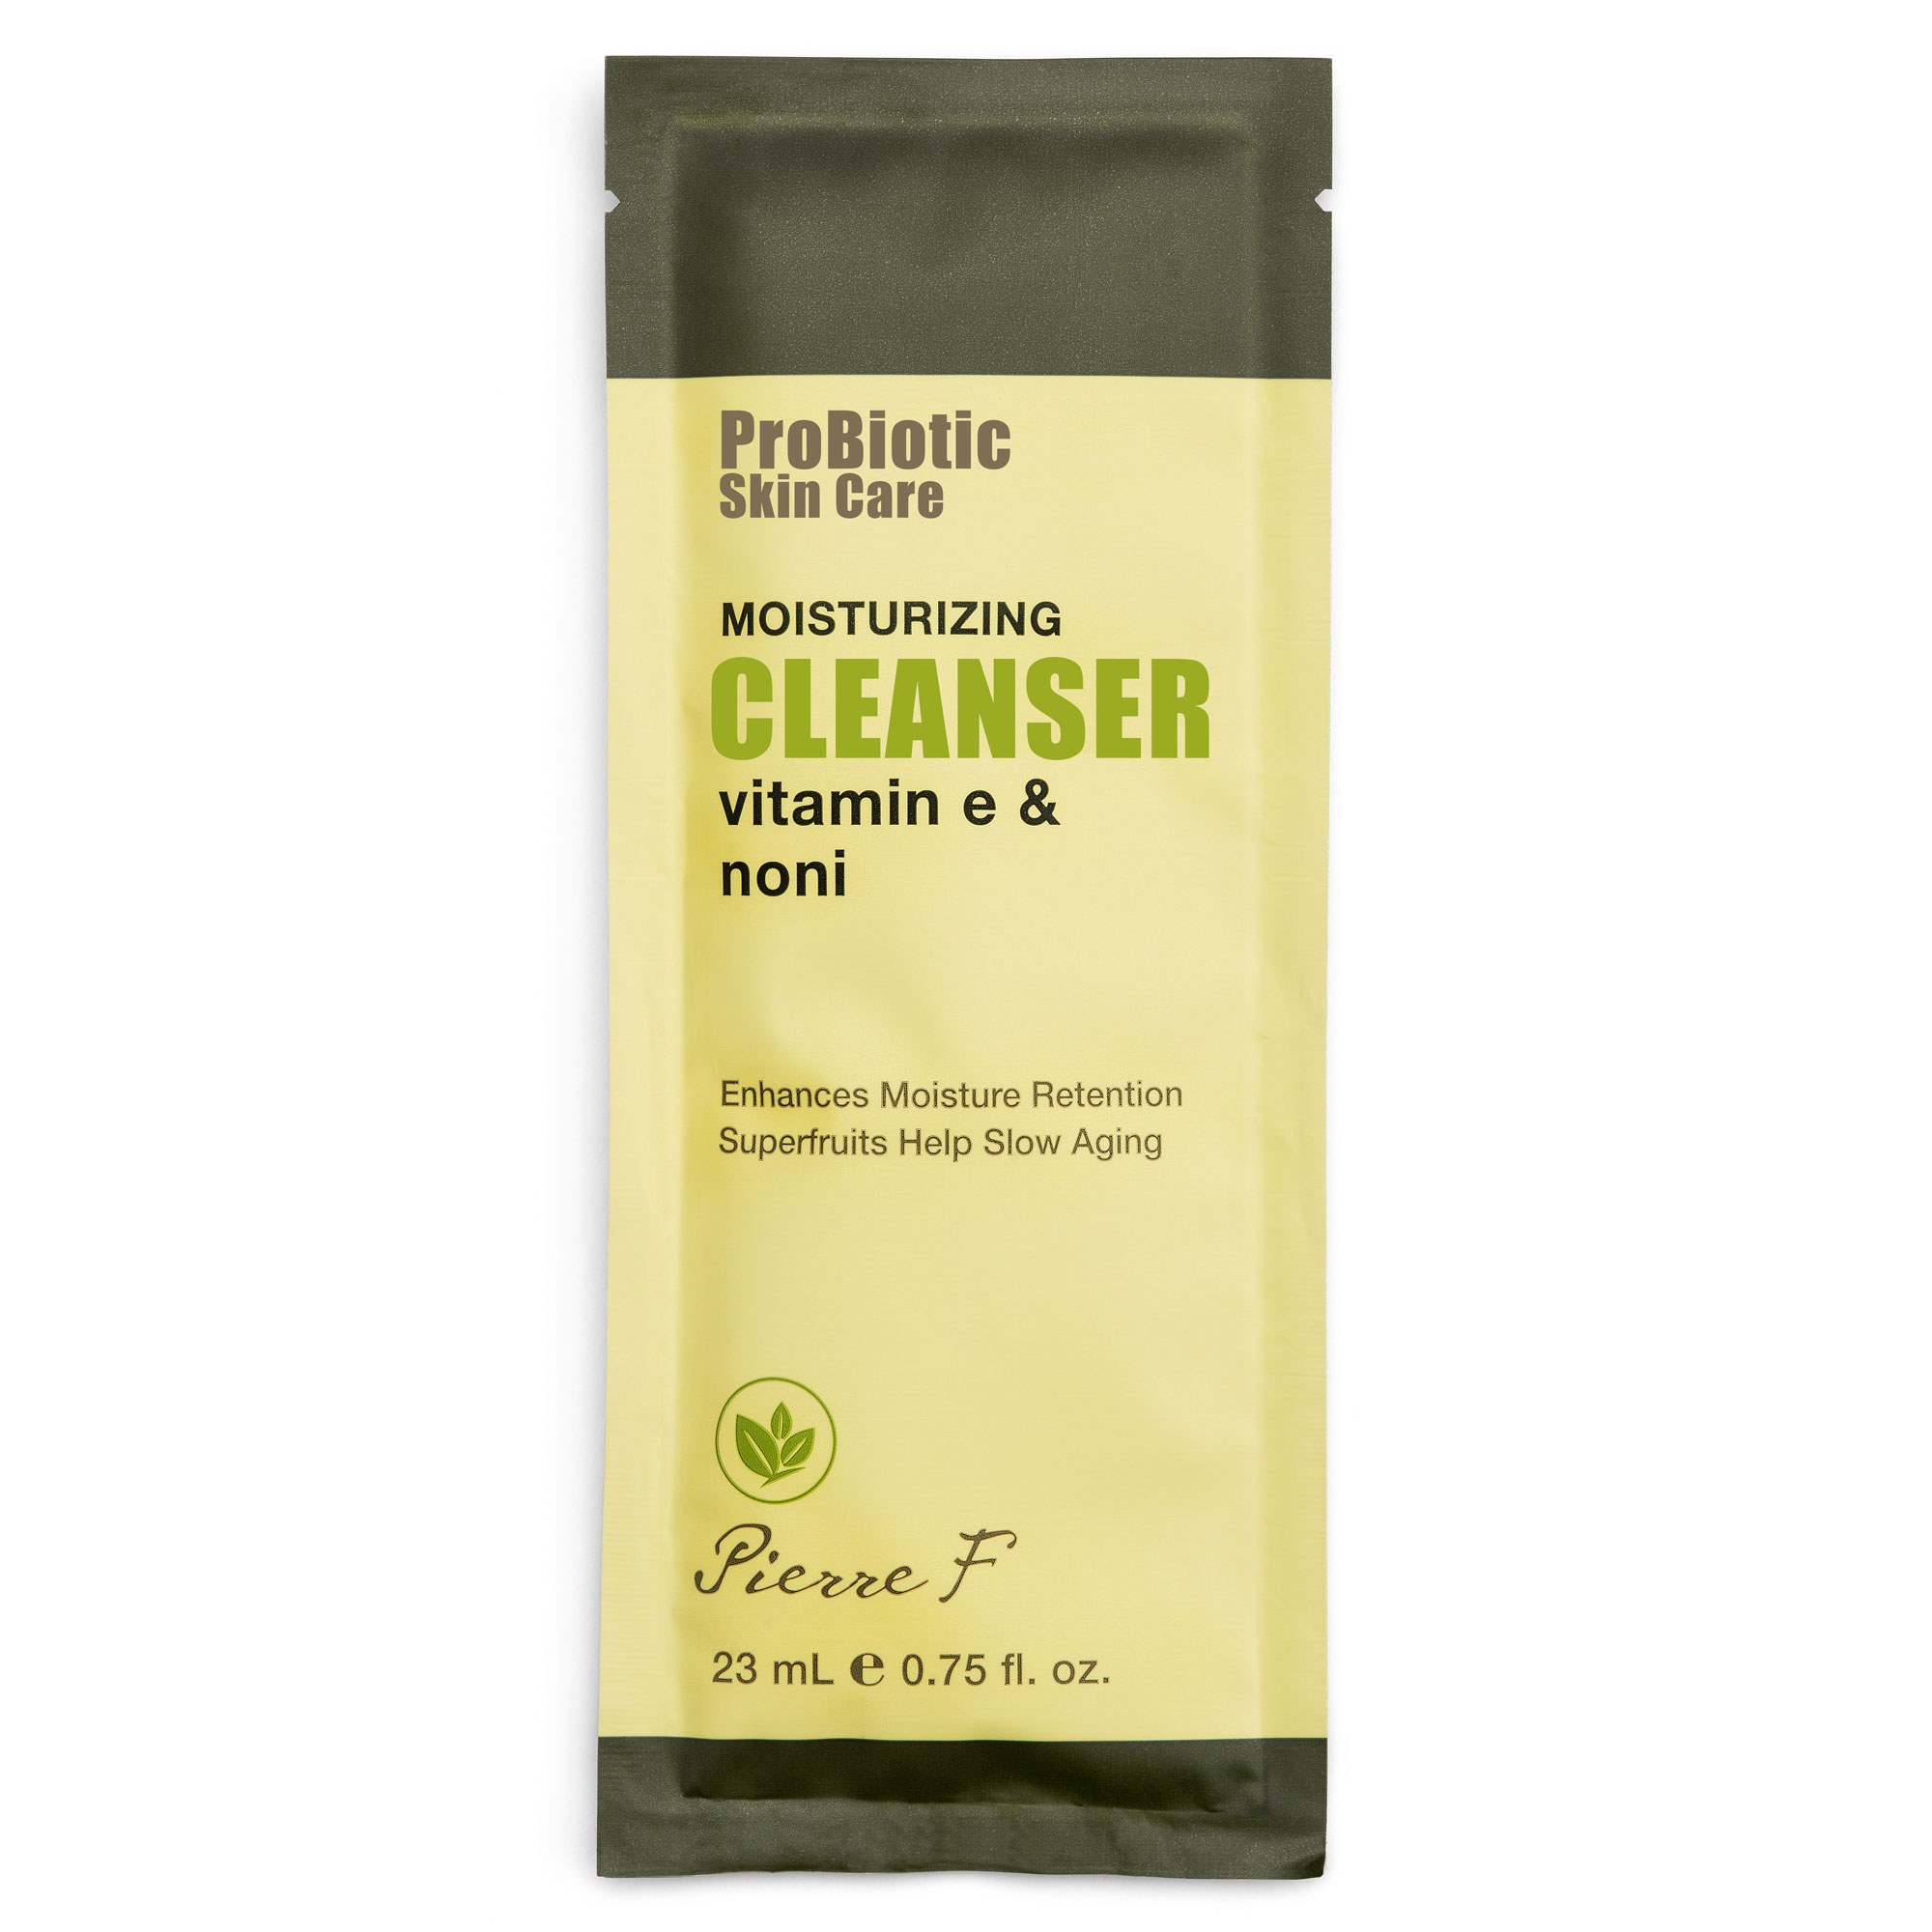 ProBiotic CLEANSERS: Moisturizing Cleanser